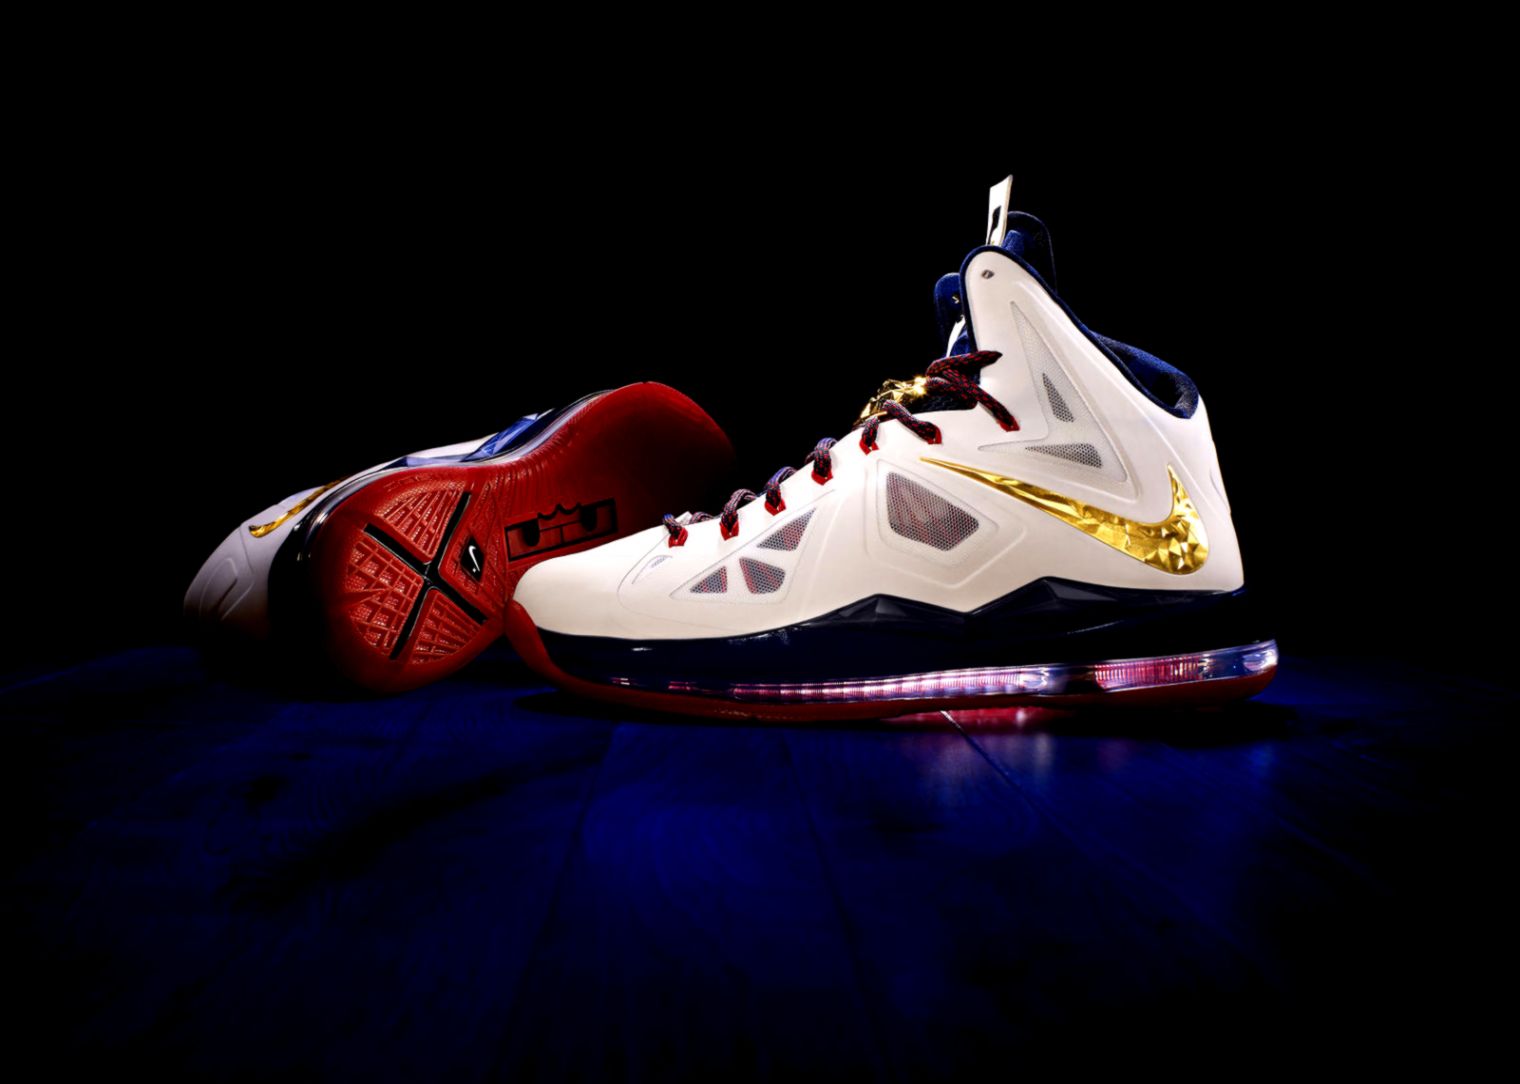 Lebron James Shoes Wallpaper 2018 In Basketball - Lebron James Shoes Latest - HD Wallpaper 